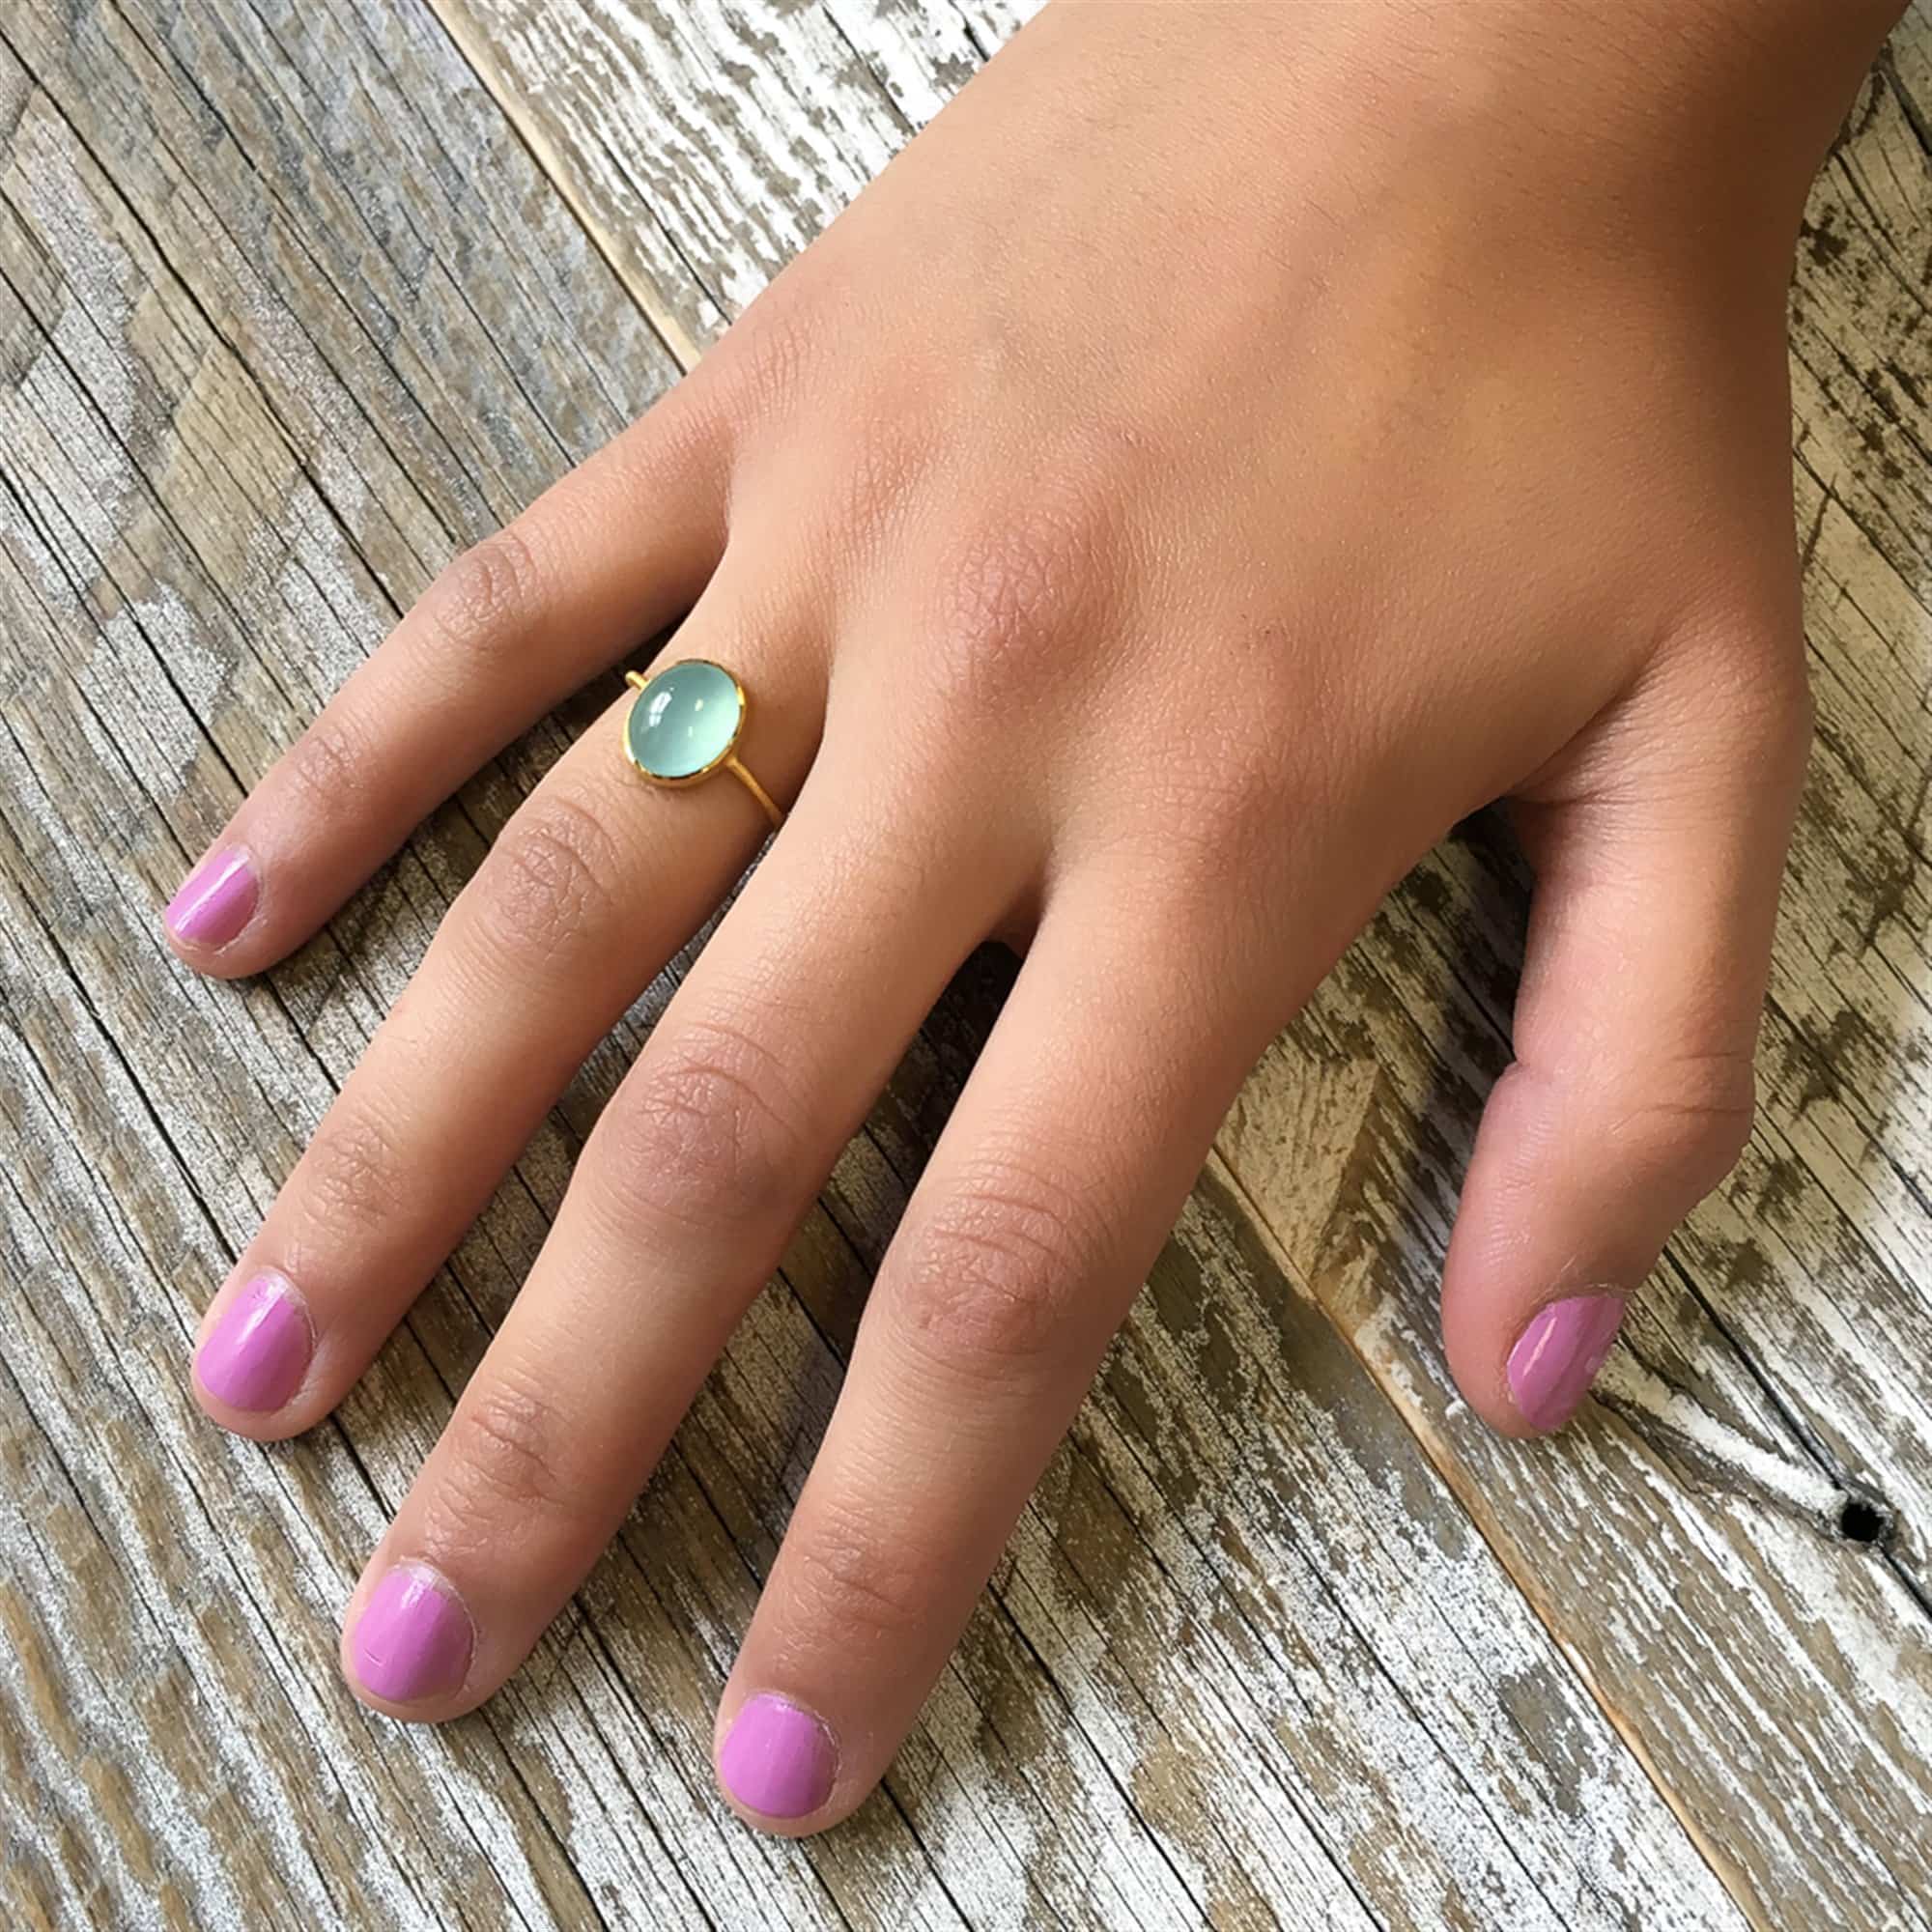 AQUA CHALCEDONY RING - SIZE 6-Jewelry-Jack and Jill Boutique